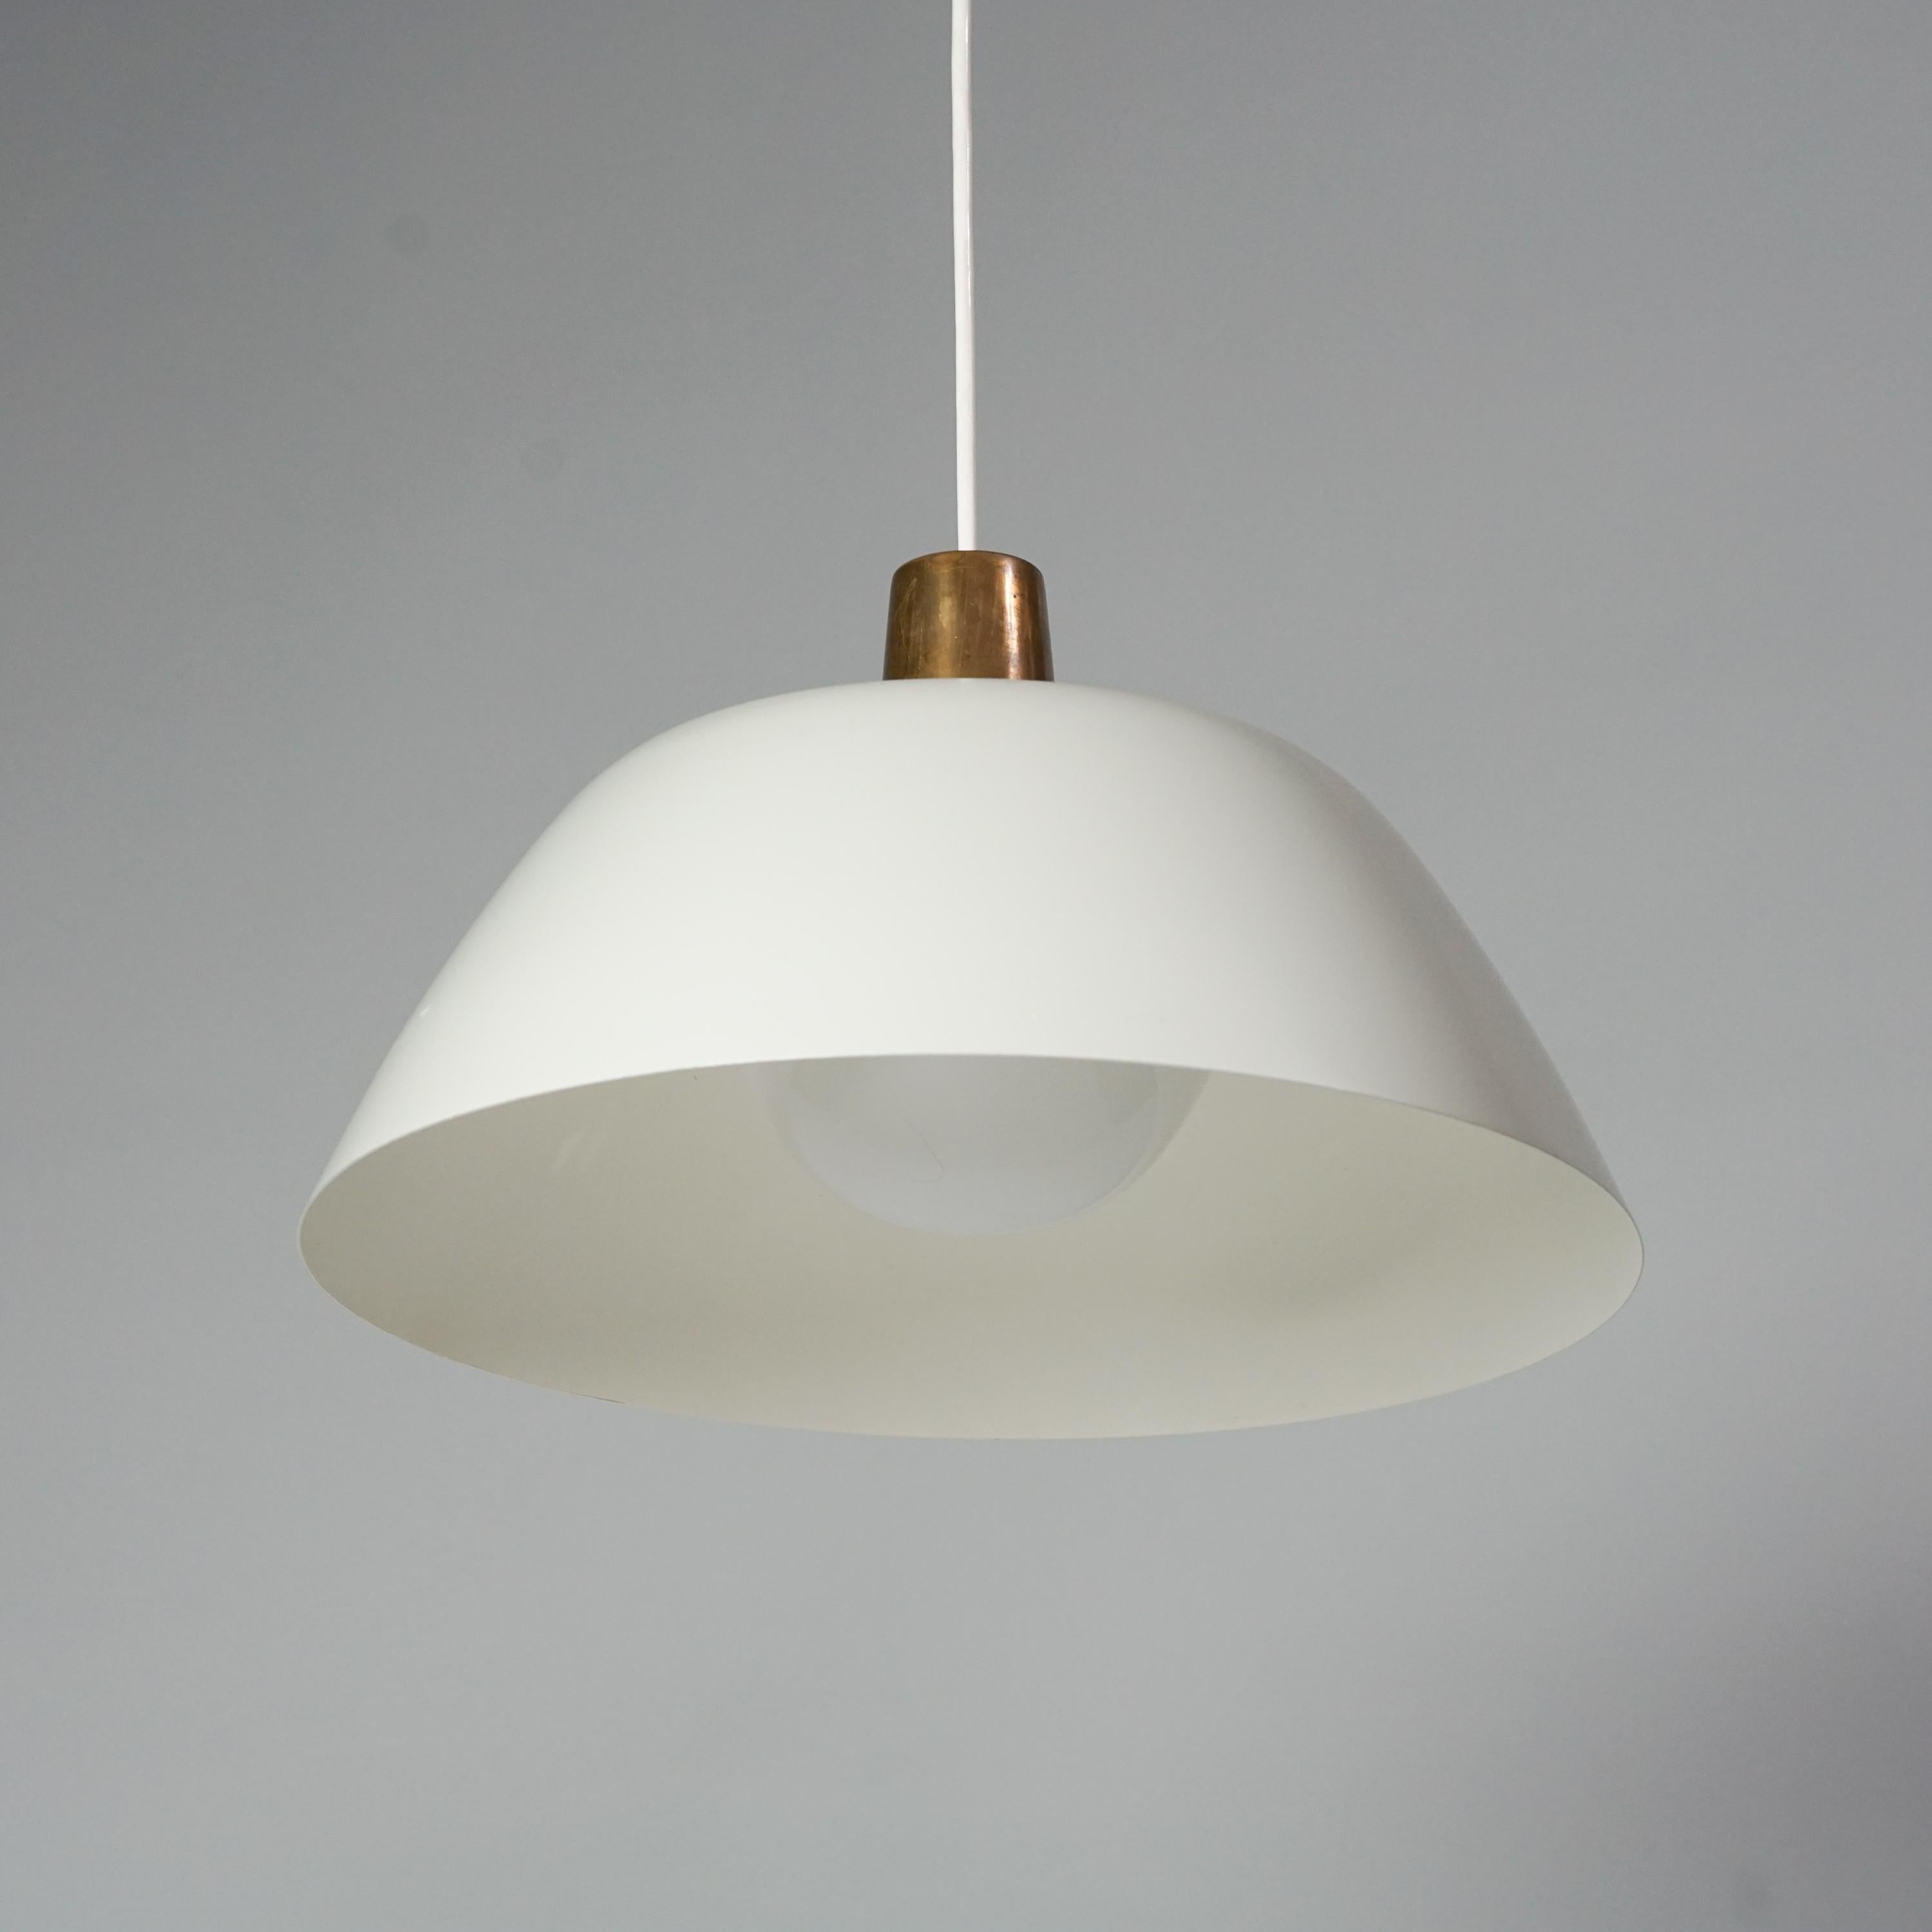 Pendant Model 61-376, designed by Lisa Johansson-Pape, 1950/1960s. Brass details, painted metal  and acrylic lampshade. Marked. Good vintage condition, minor patina consistent with age and use. Adjustable height. 

Lisa Johansson-Pape is one of the